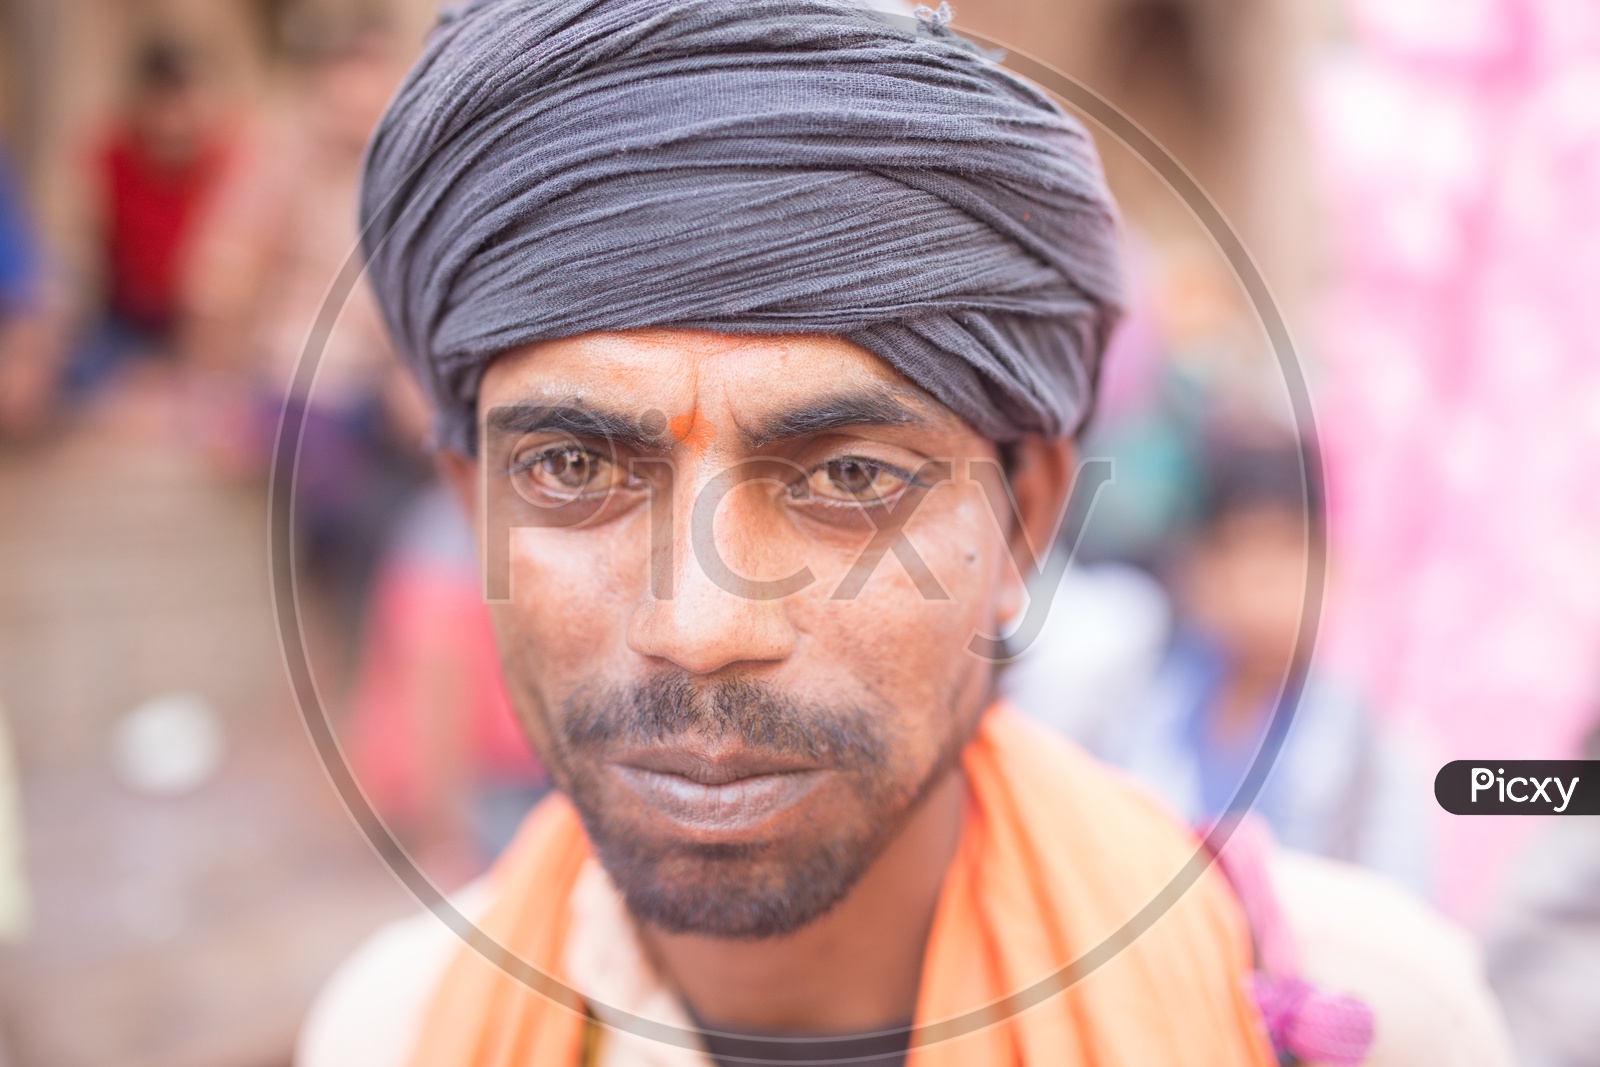 Portrait of an Indian man with black turban